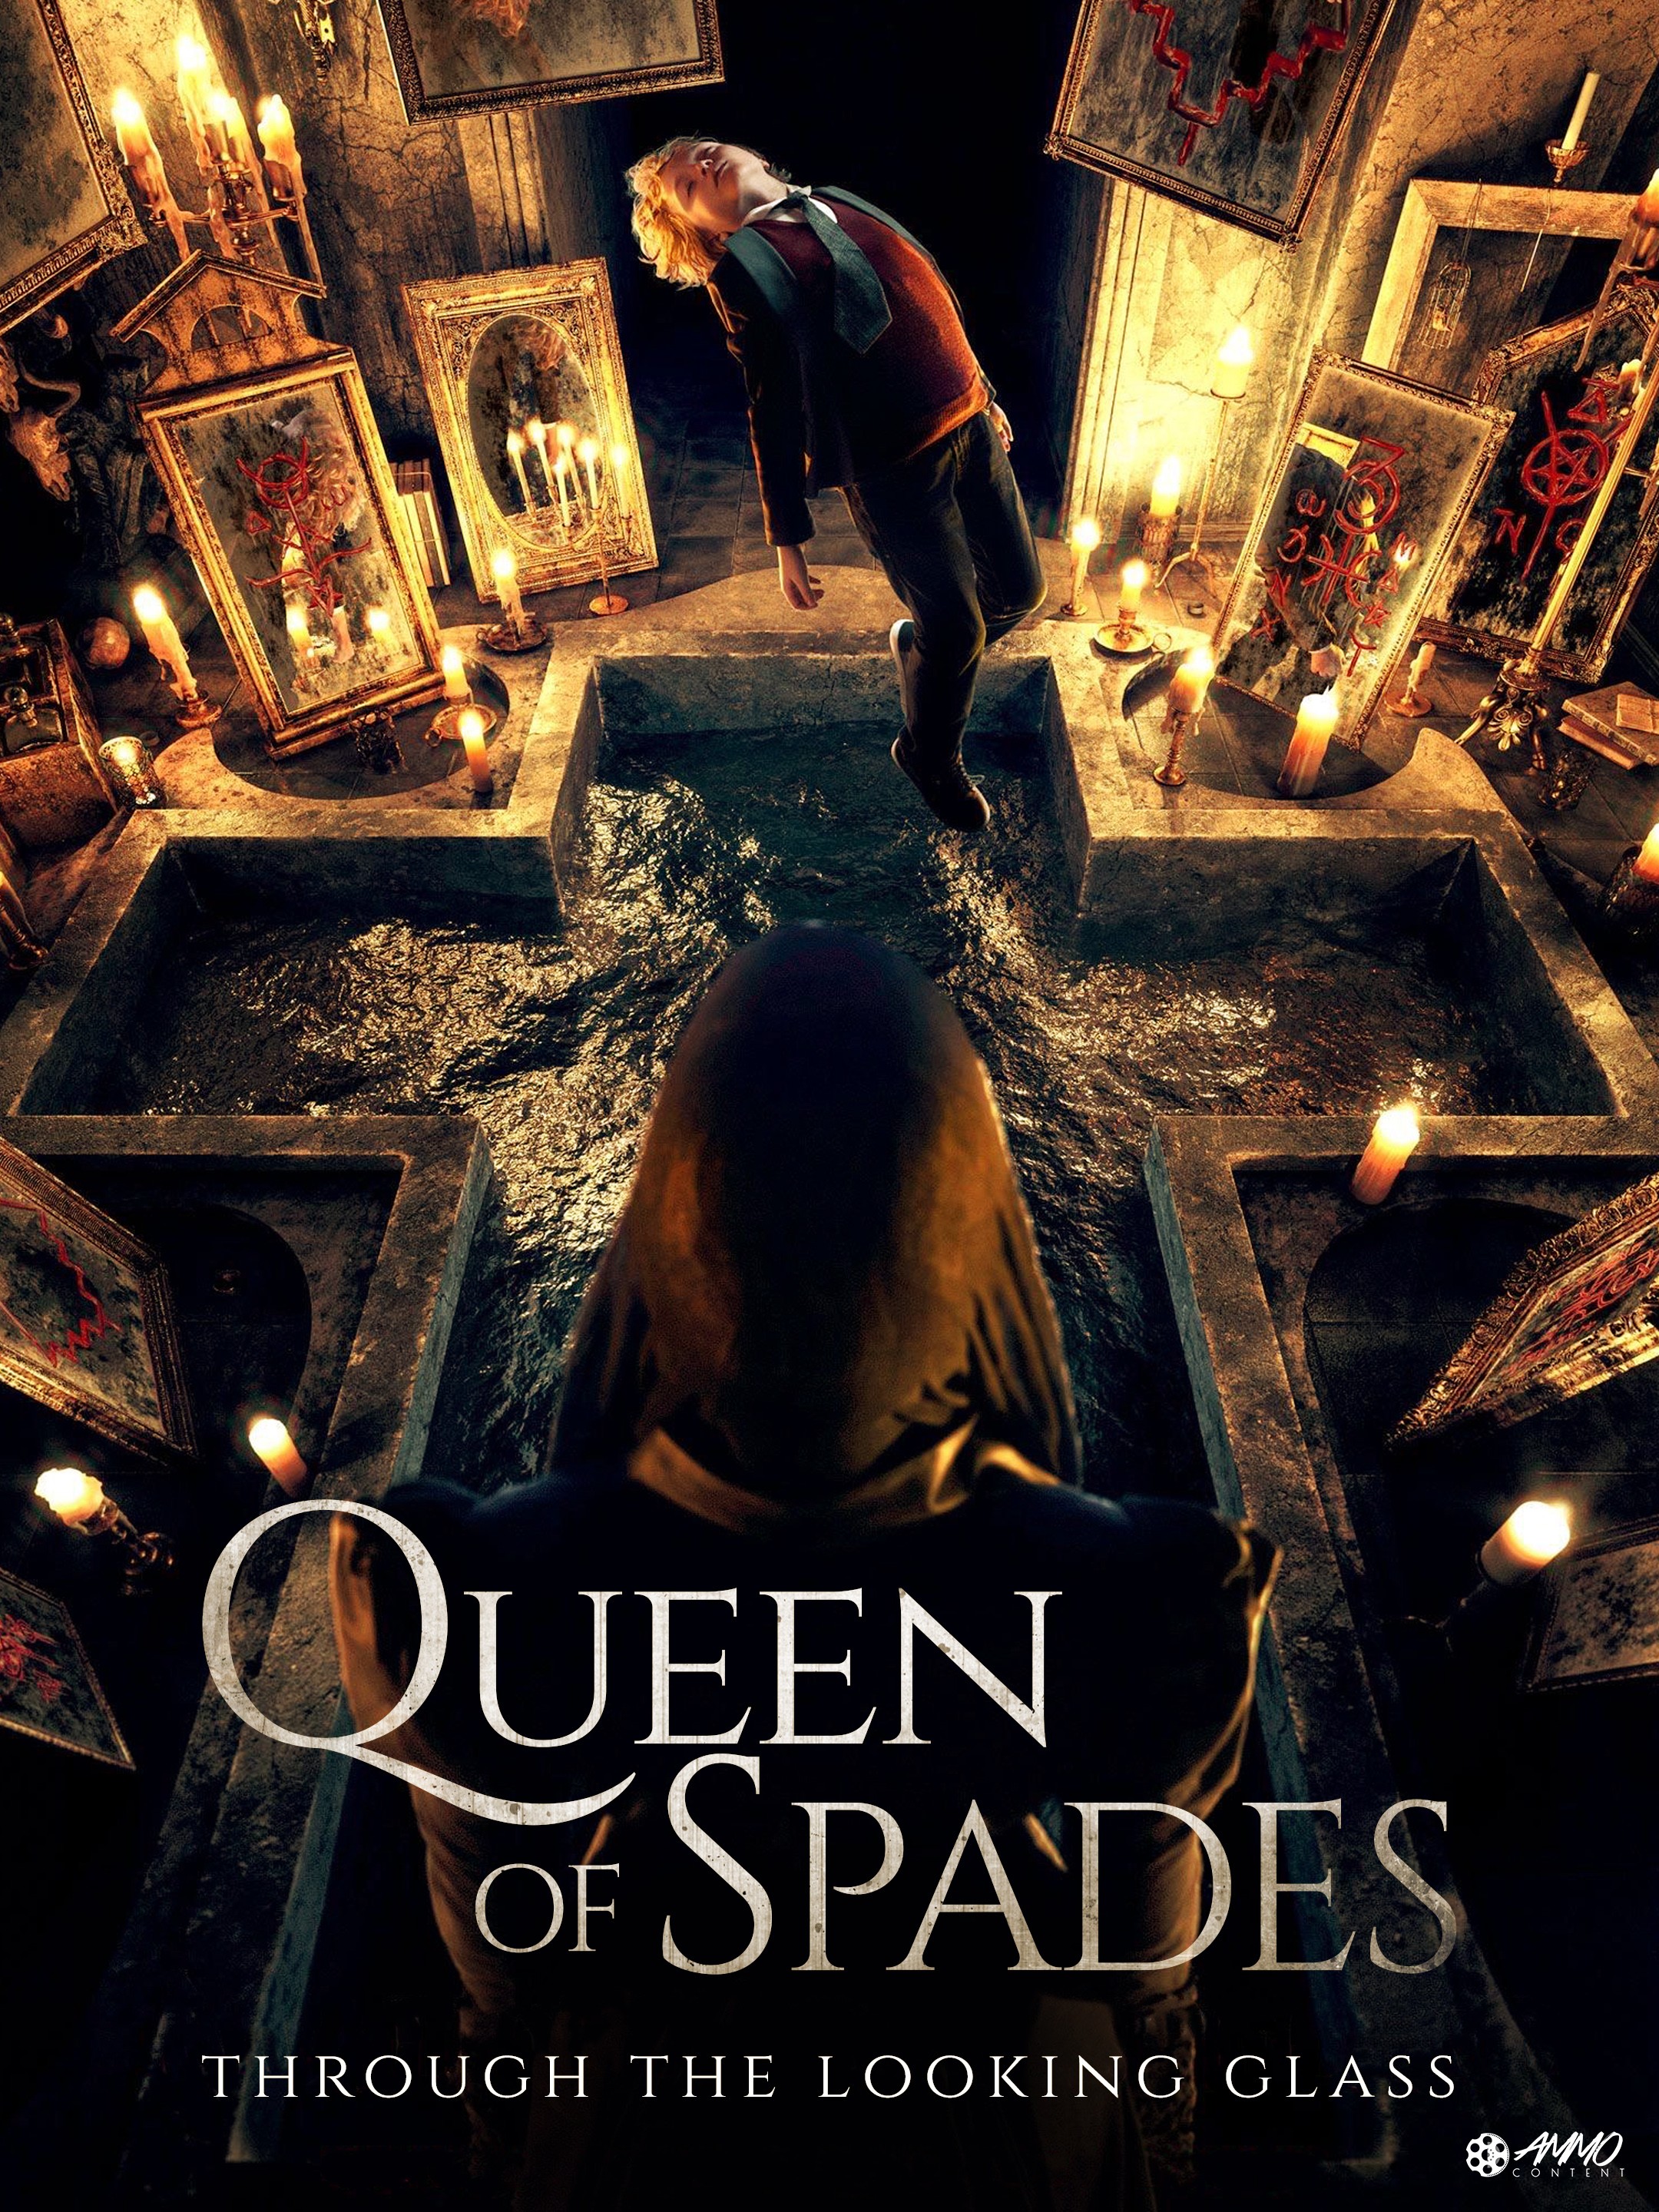 Queen of Spades Through the Looking Glass (2019) 480p BluRay Hindi ORG Dual Audio Movie ESubs [300MB]